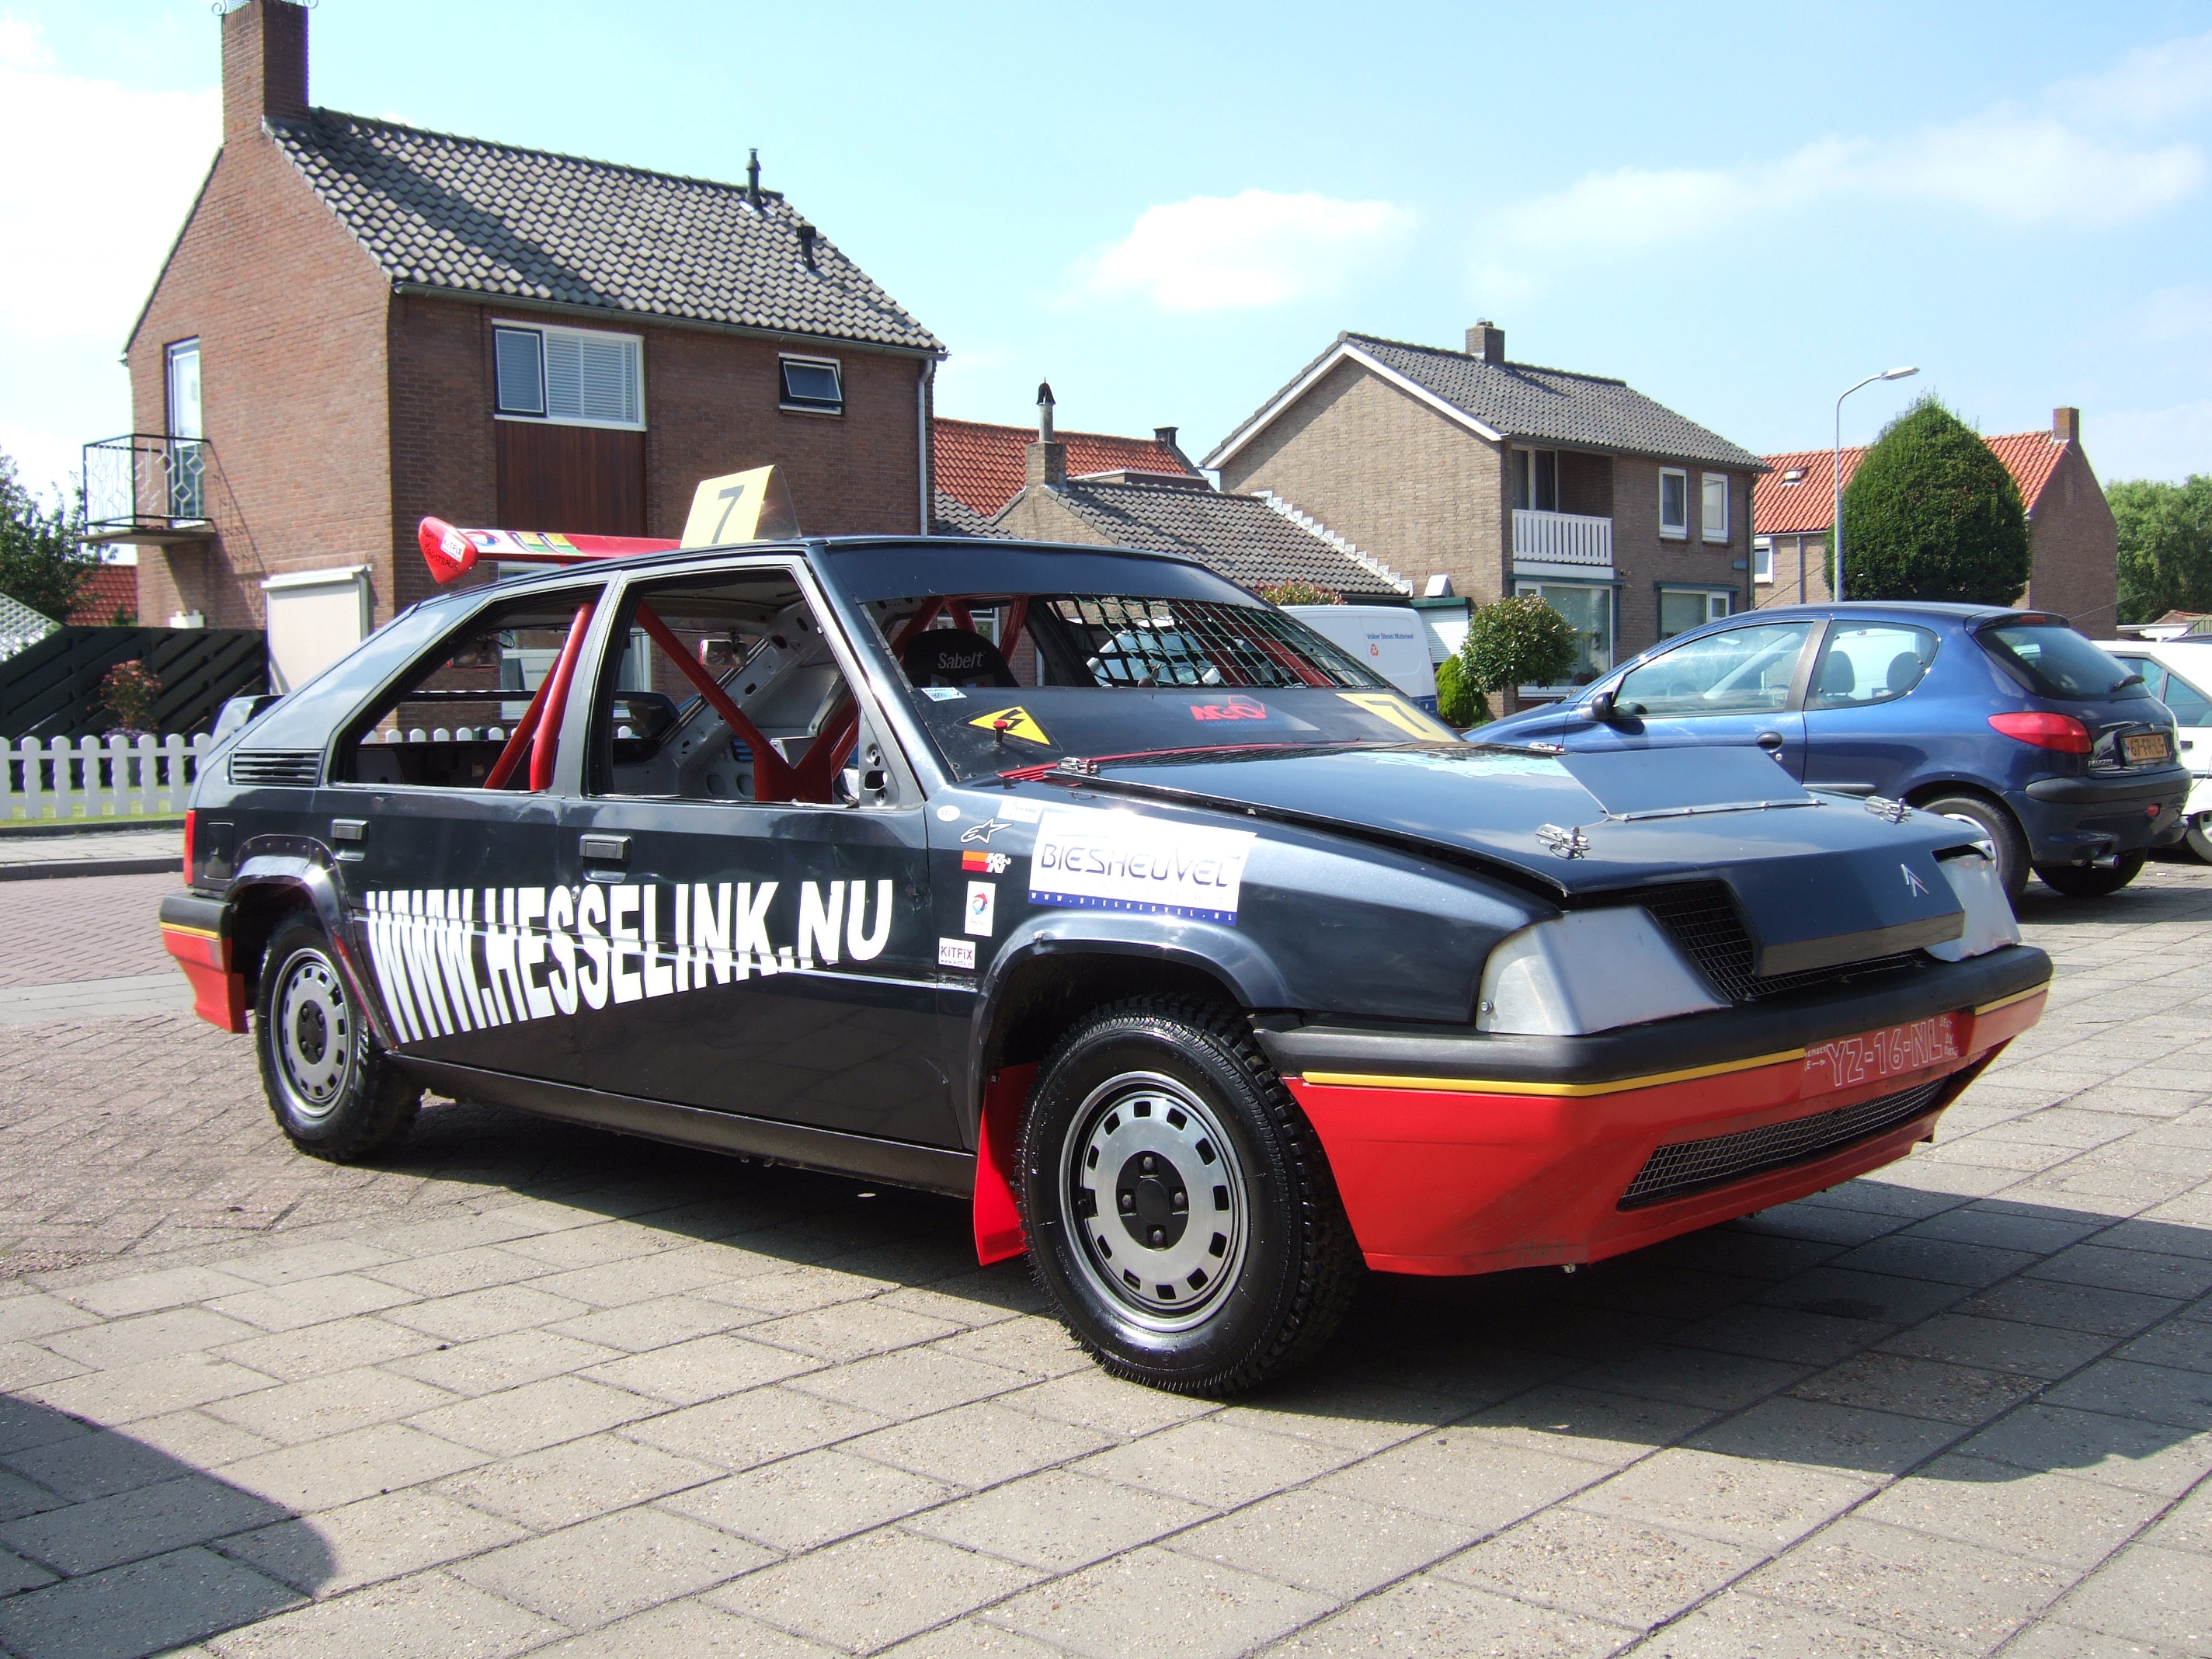 Peugeot 205 1.9 with Kant cam and 38dgas carb - Page 3 - Engines & Drivetrain - PistonHeads